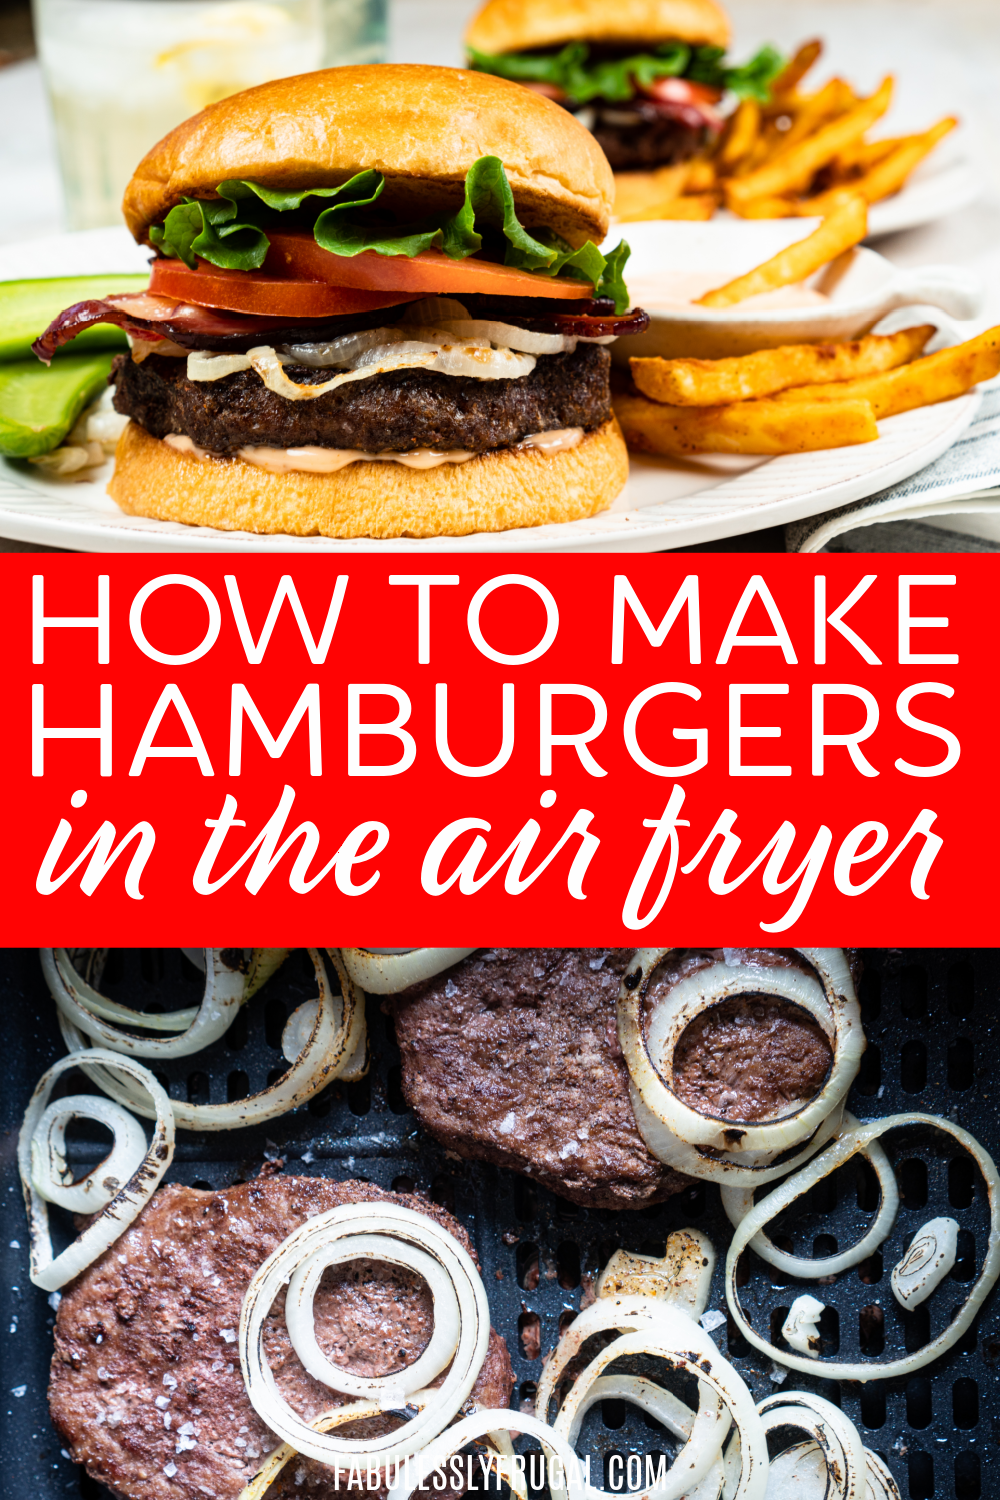 You can make burgers in the air fryer in under 30 minutes!